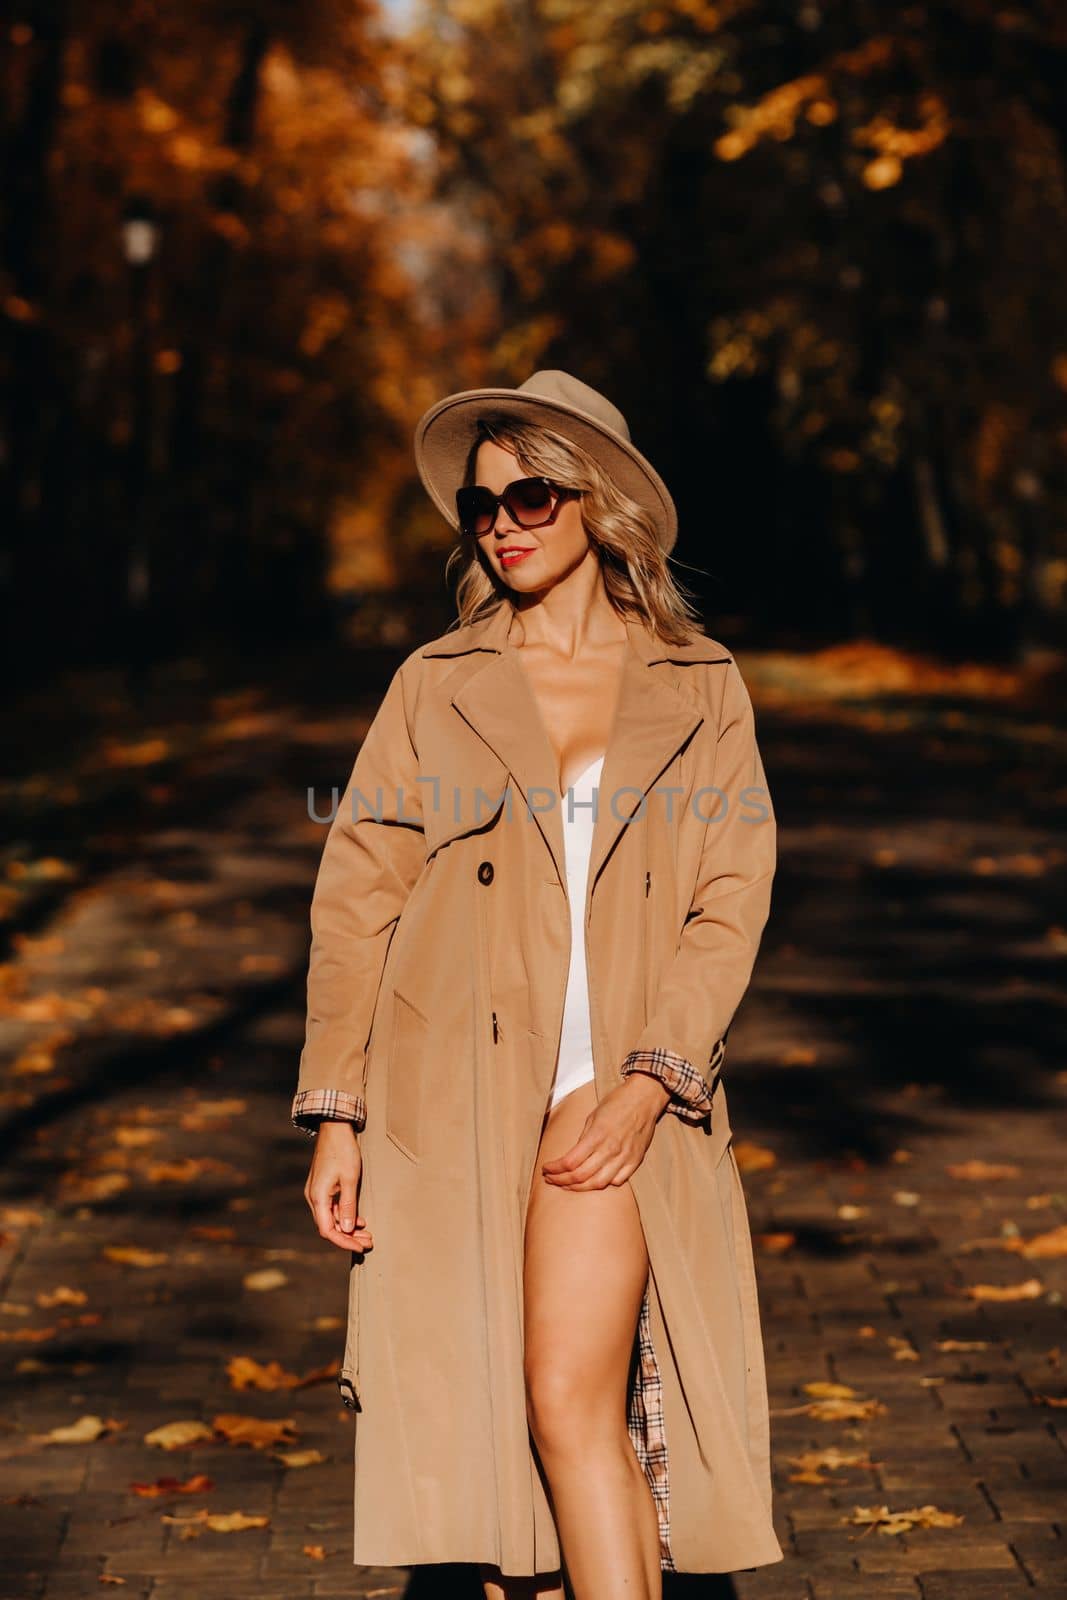 Sexy girl in a coat and hat in an autumn sunny park by Lobachad